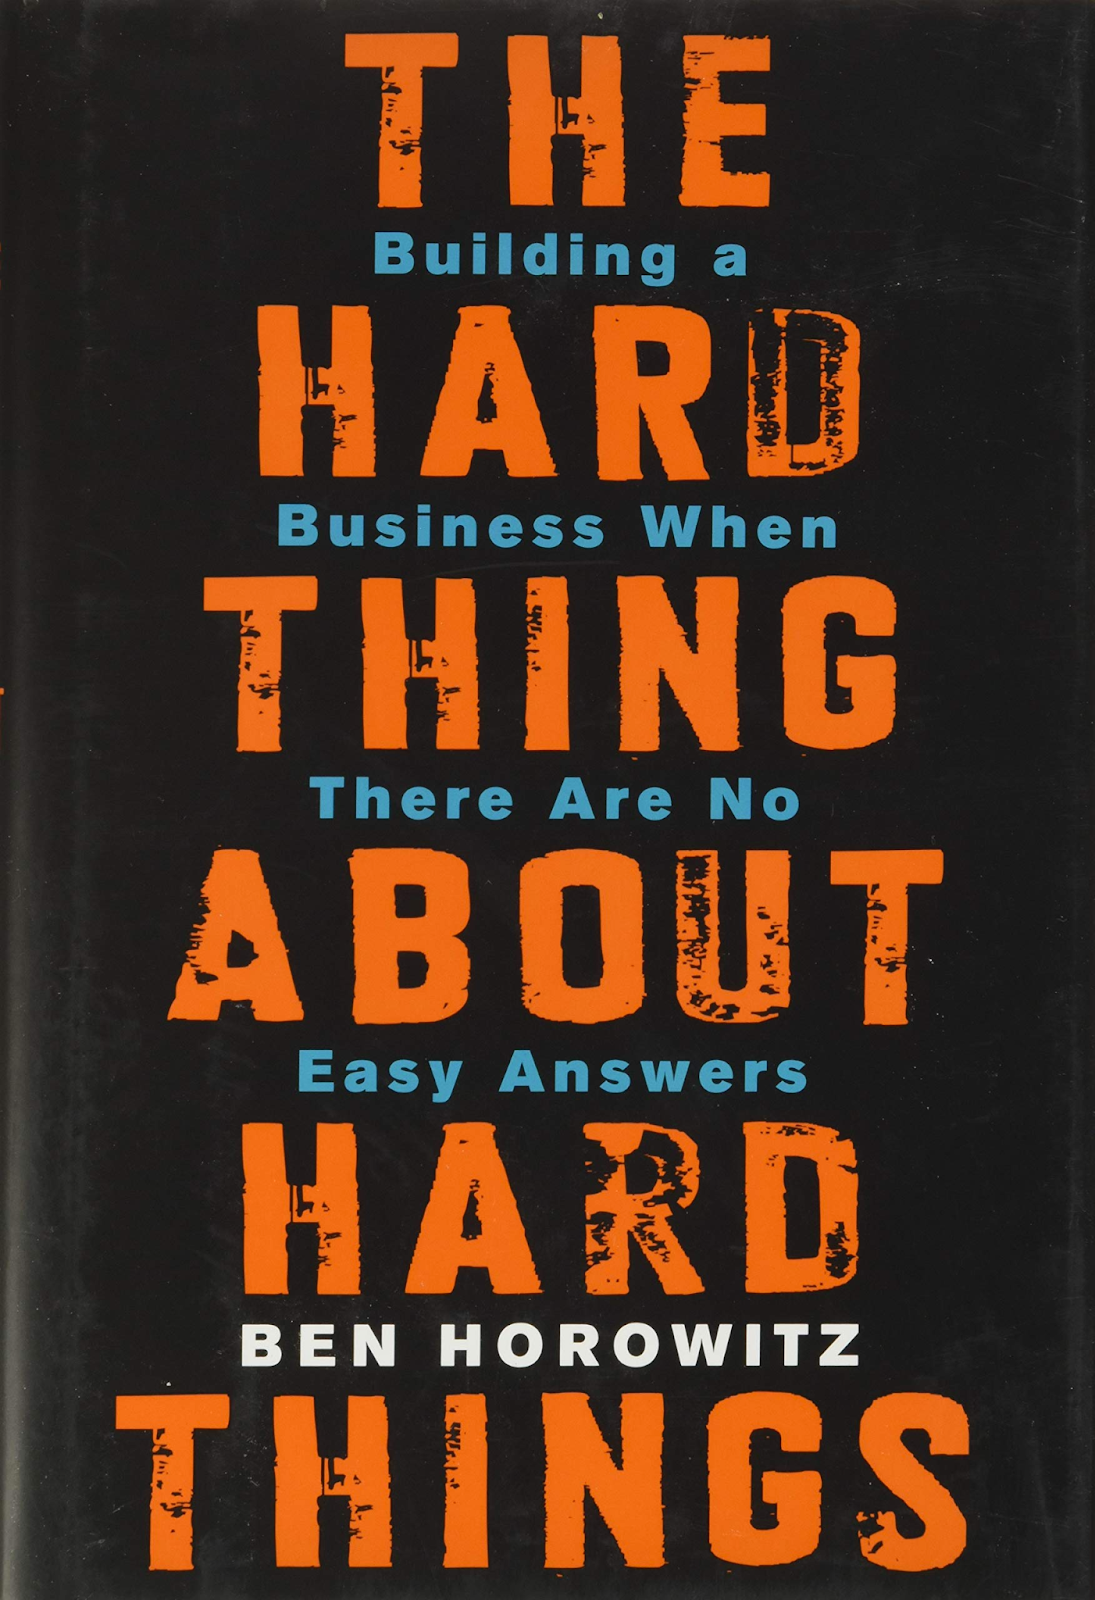  The Hard Thing About Hard Things - product management books